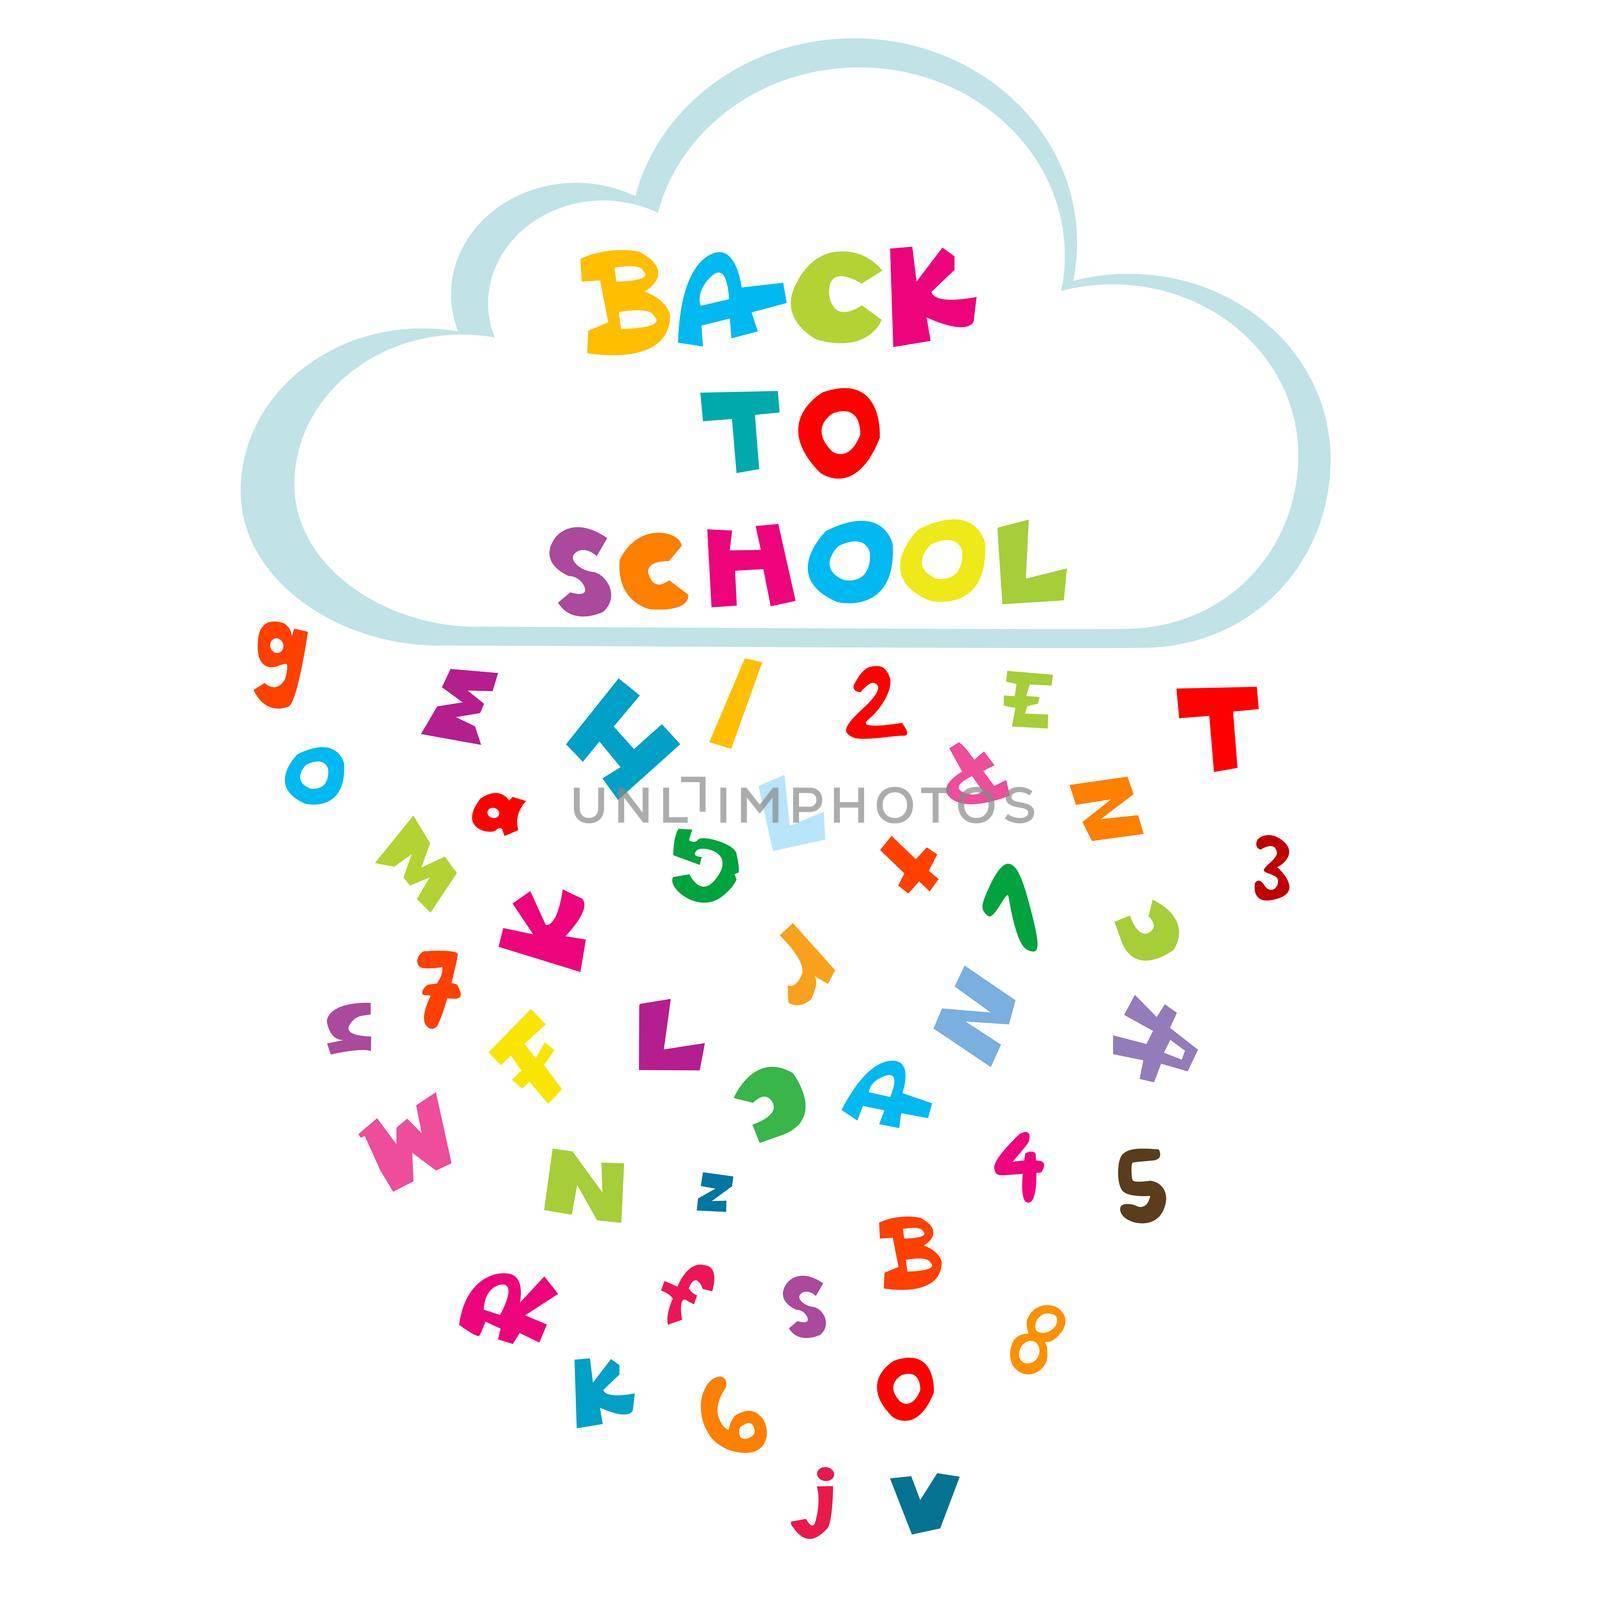 Back to school illustration with cloud and rain made of letters and numbers by hibrida13